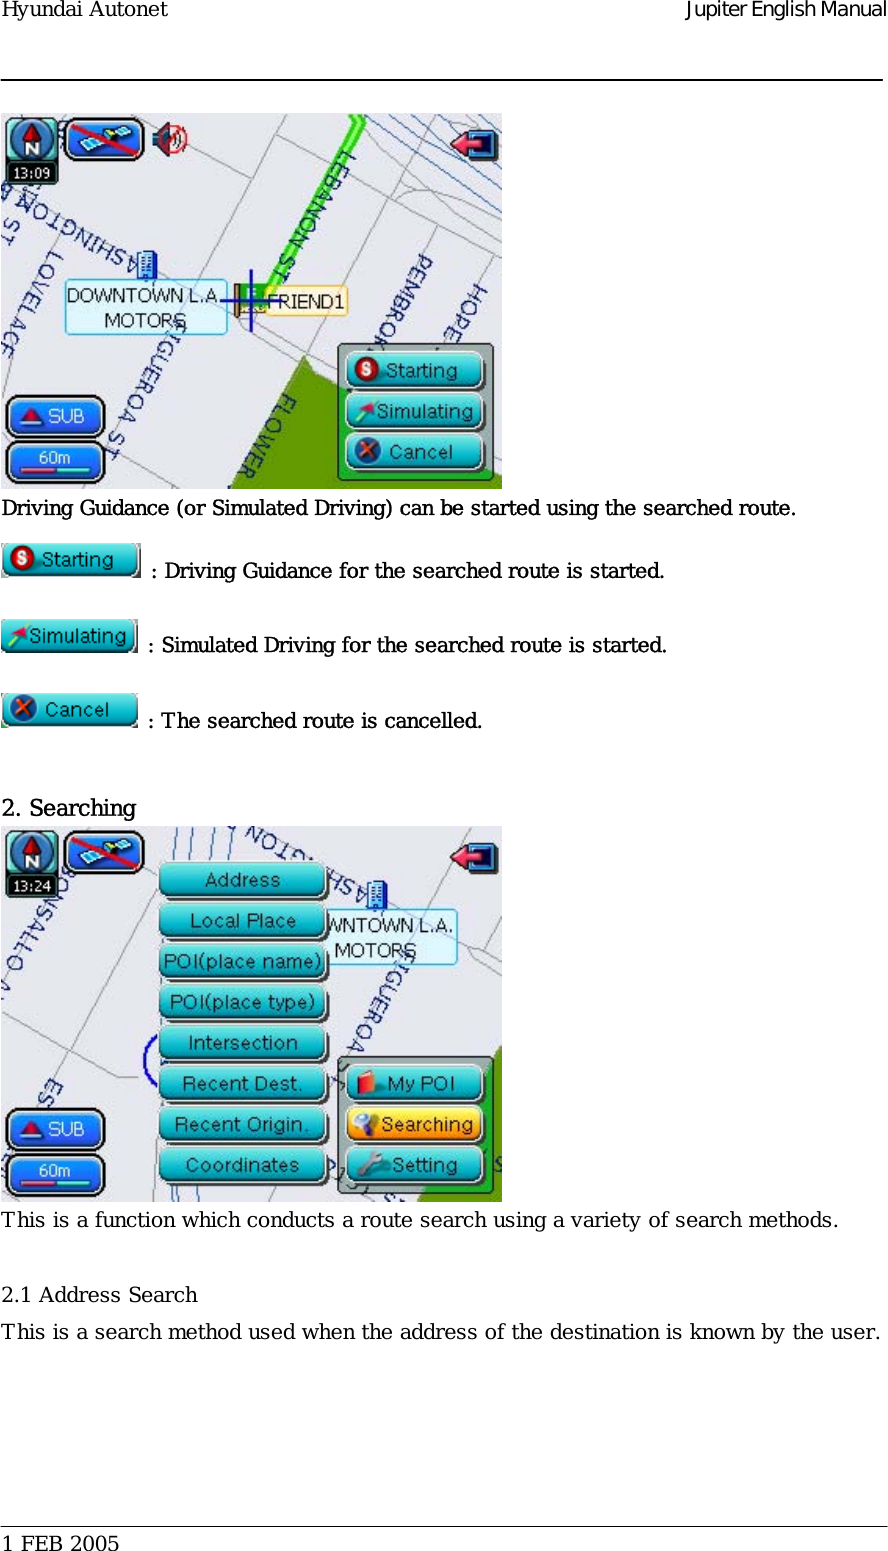 Hyundai Autonet    Jupiter English Manual  Driving Guidance (or Simulated Driving) can be started using the searched route.   : Driving Guidance for the searched route is started.  : Simulated Driving for the searched route is started.  : The searched route is cancelled.   2. Searching  This is a function which conducts a route search using a variety of search methods.   2.1 Address Search This is a search method used when the address of the destination is known by the user.     1 FEB 2005    